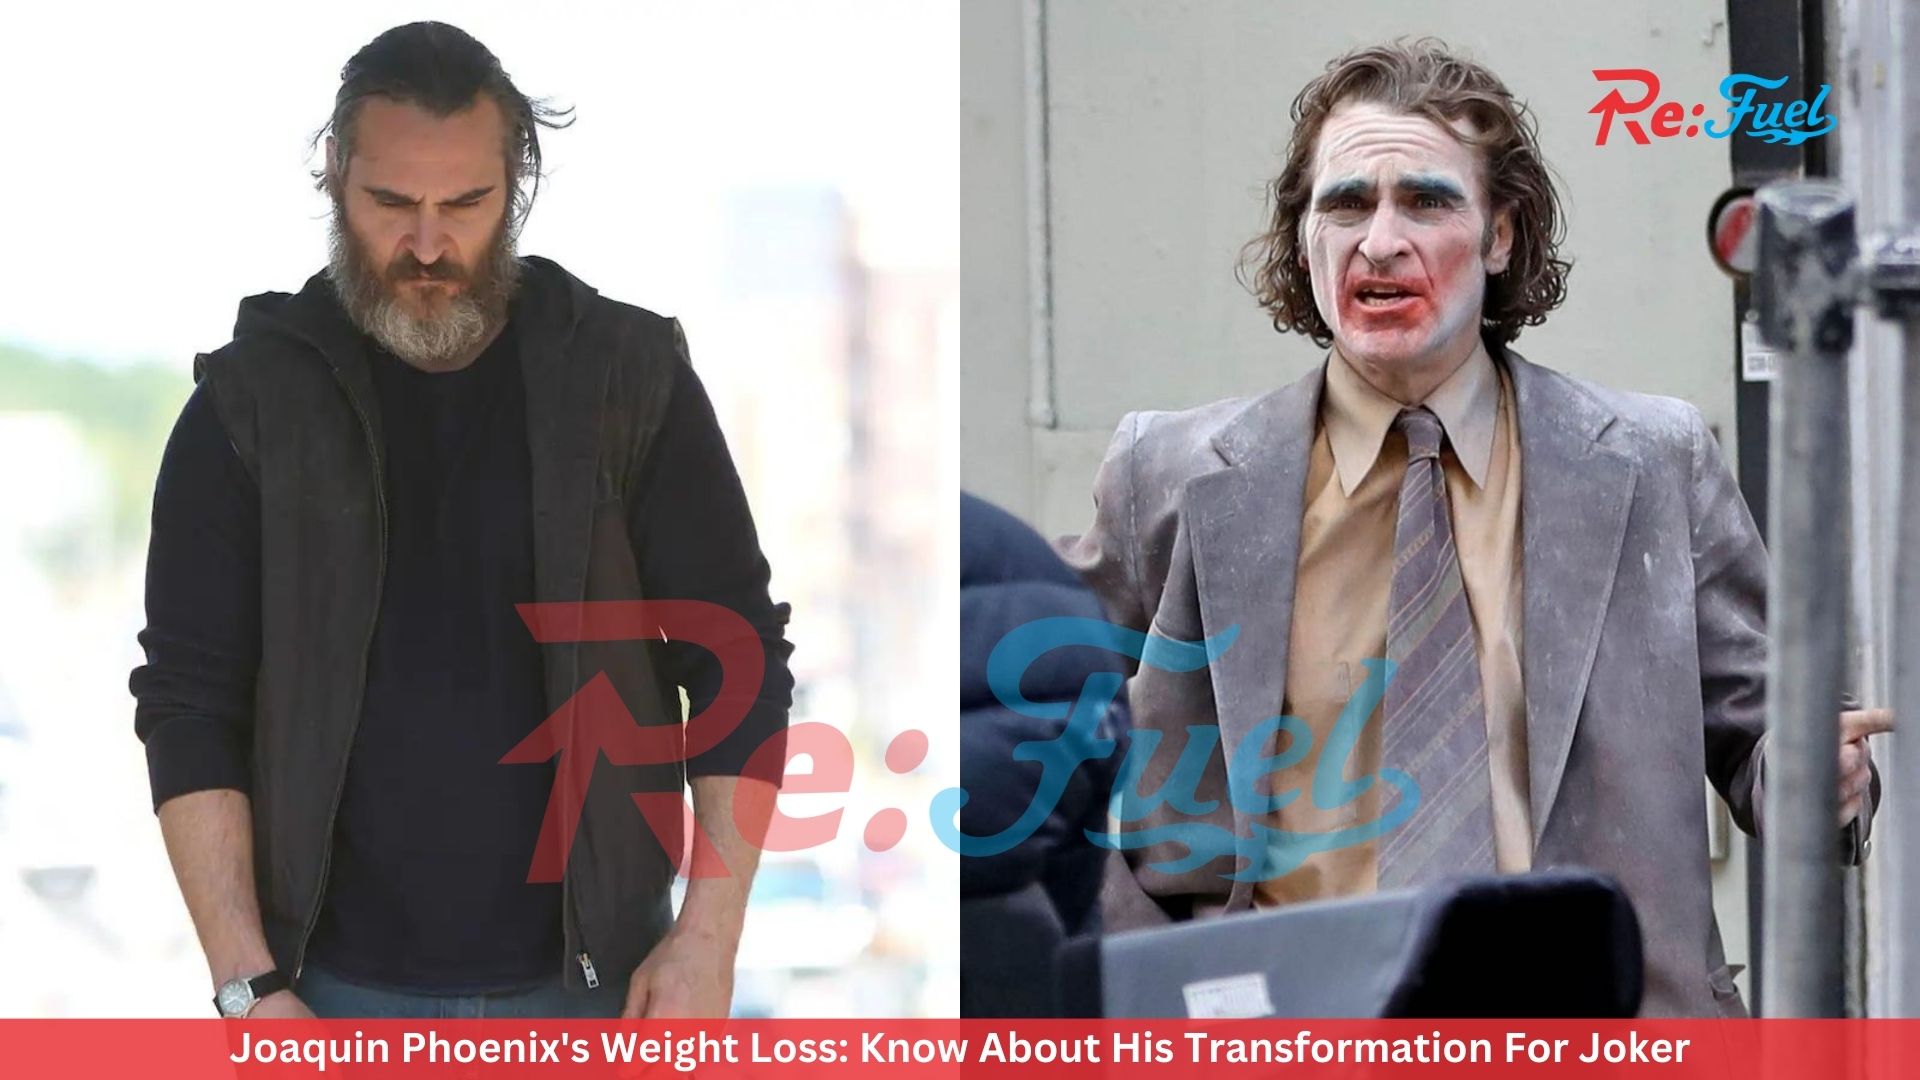 Joaquin Phoenix's Weight Loss: Know About His Transformation For Joker